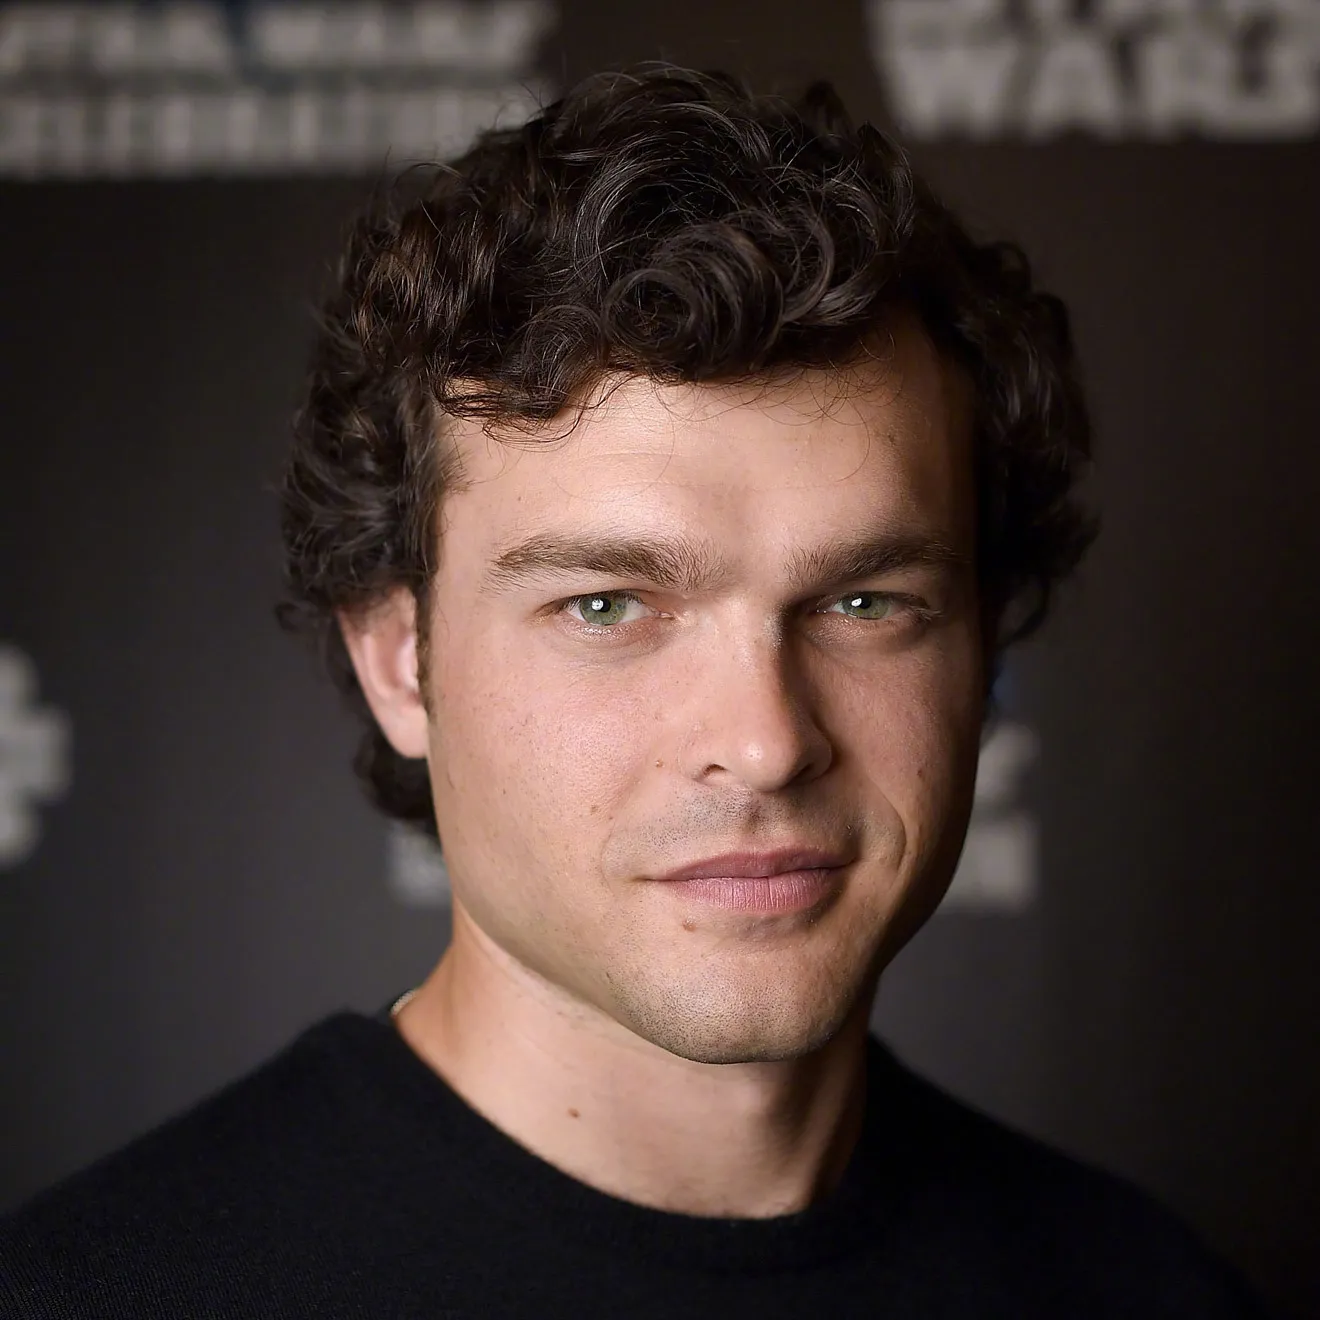 Alden Ehrenreich joins Marvel's 'Ironheart' as an unknown important character | FMV6